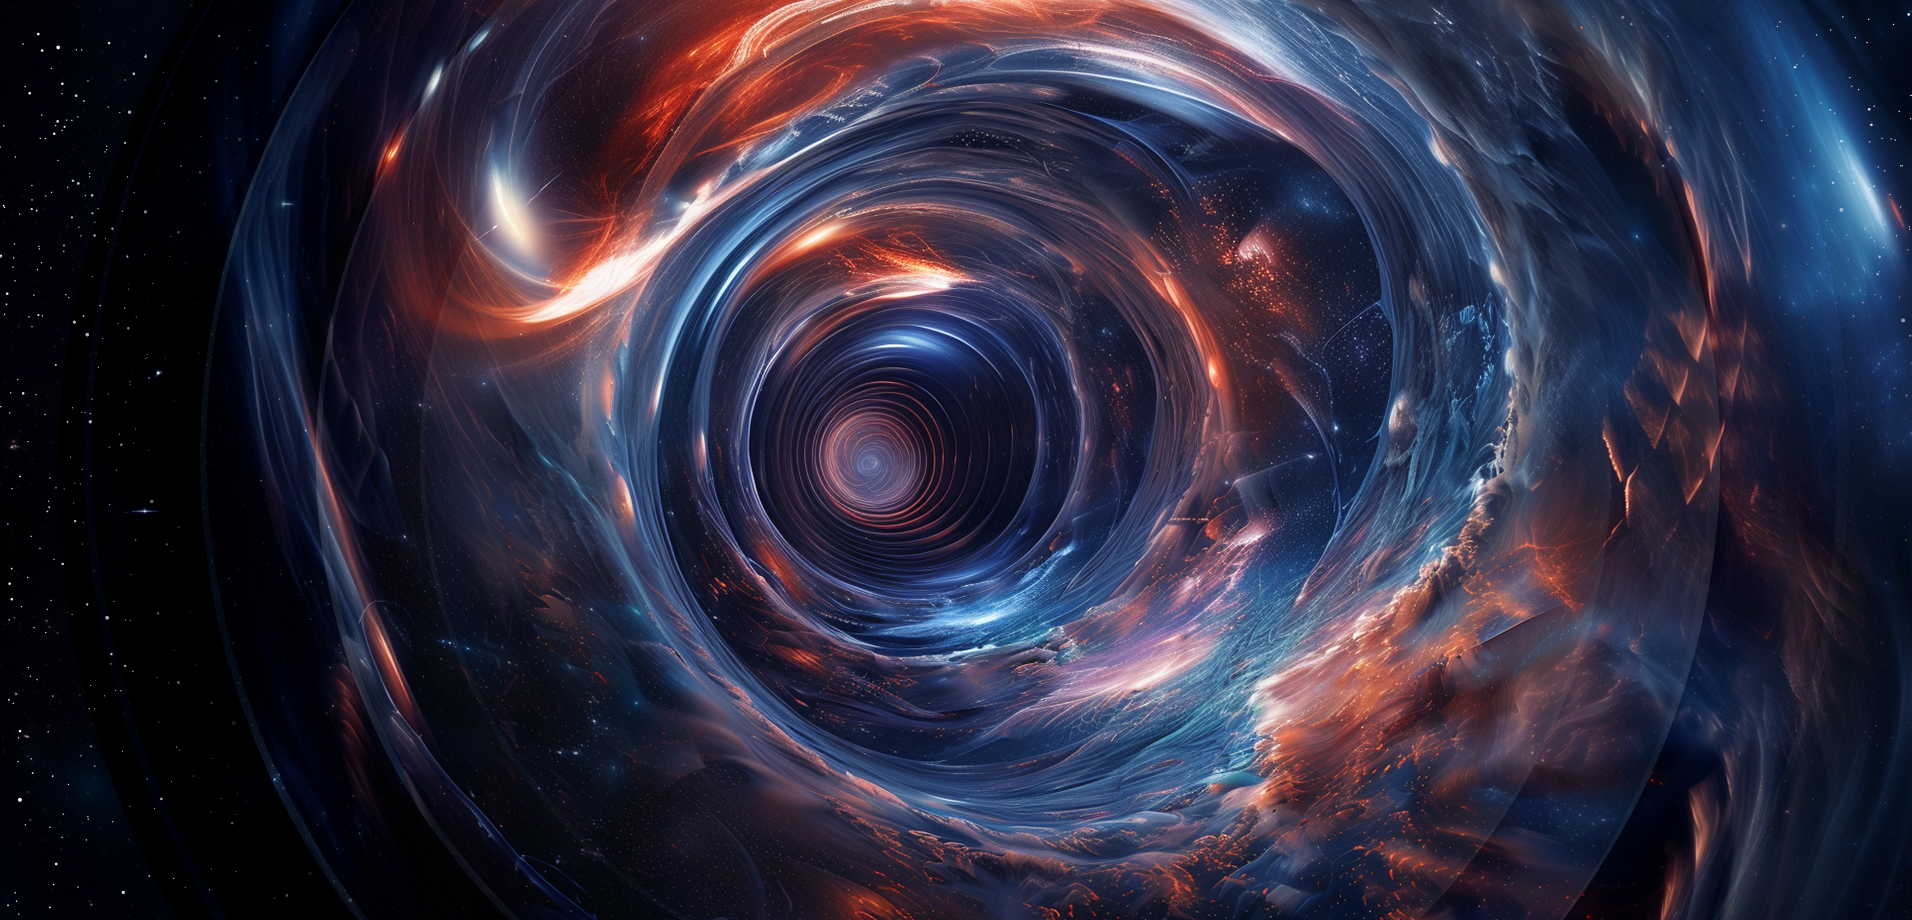 Are Wormholes Real? Mysterious Portals of the Universe